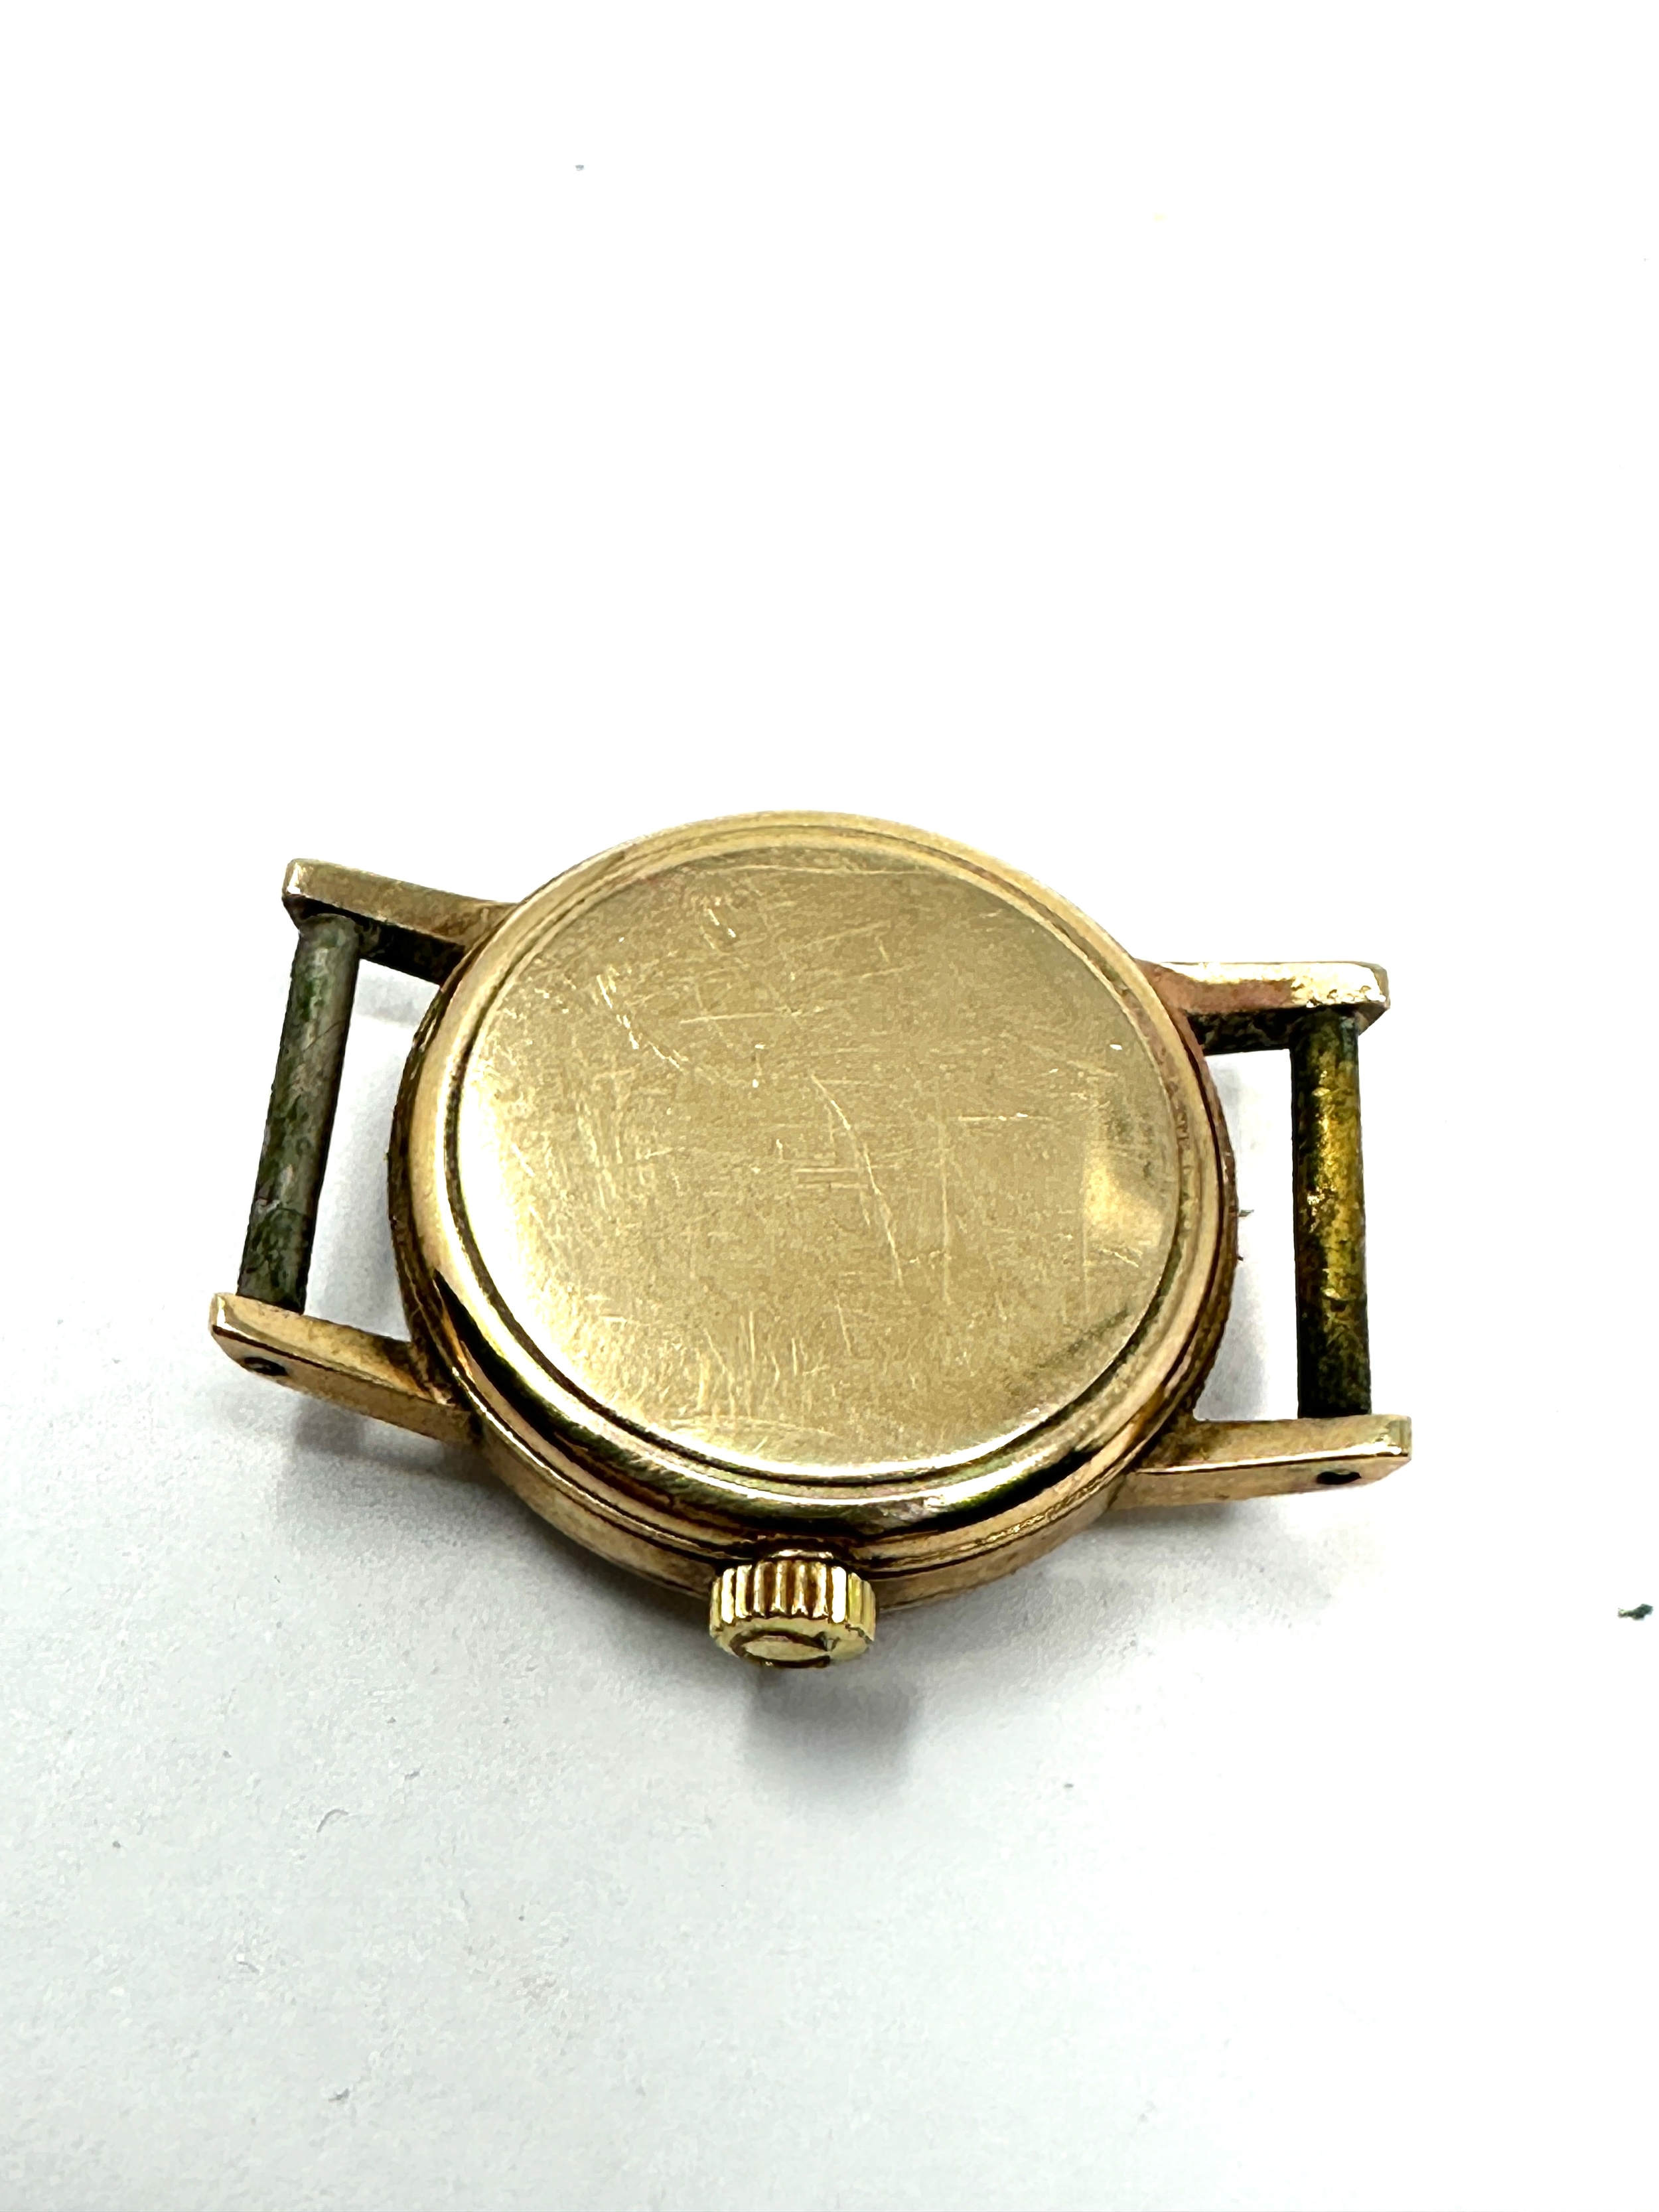 9ct gold ladies omega wristwatch the watch is ticking - Image 3 of 3